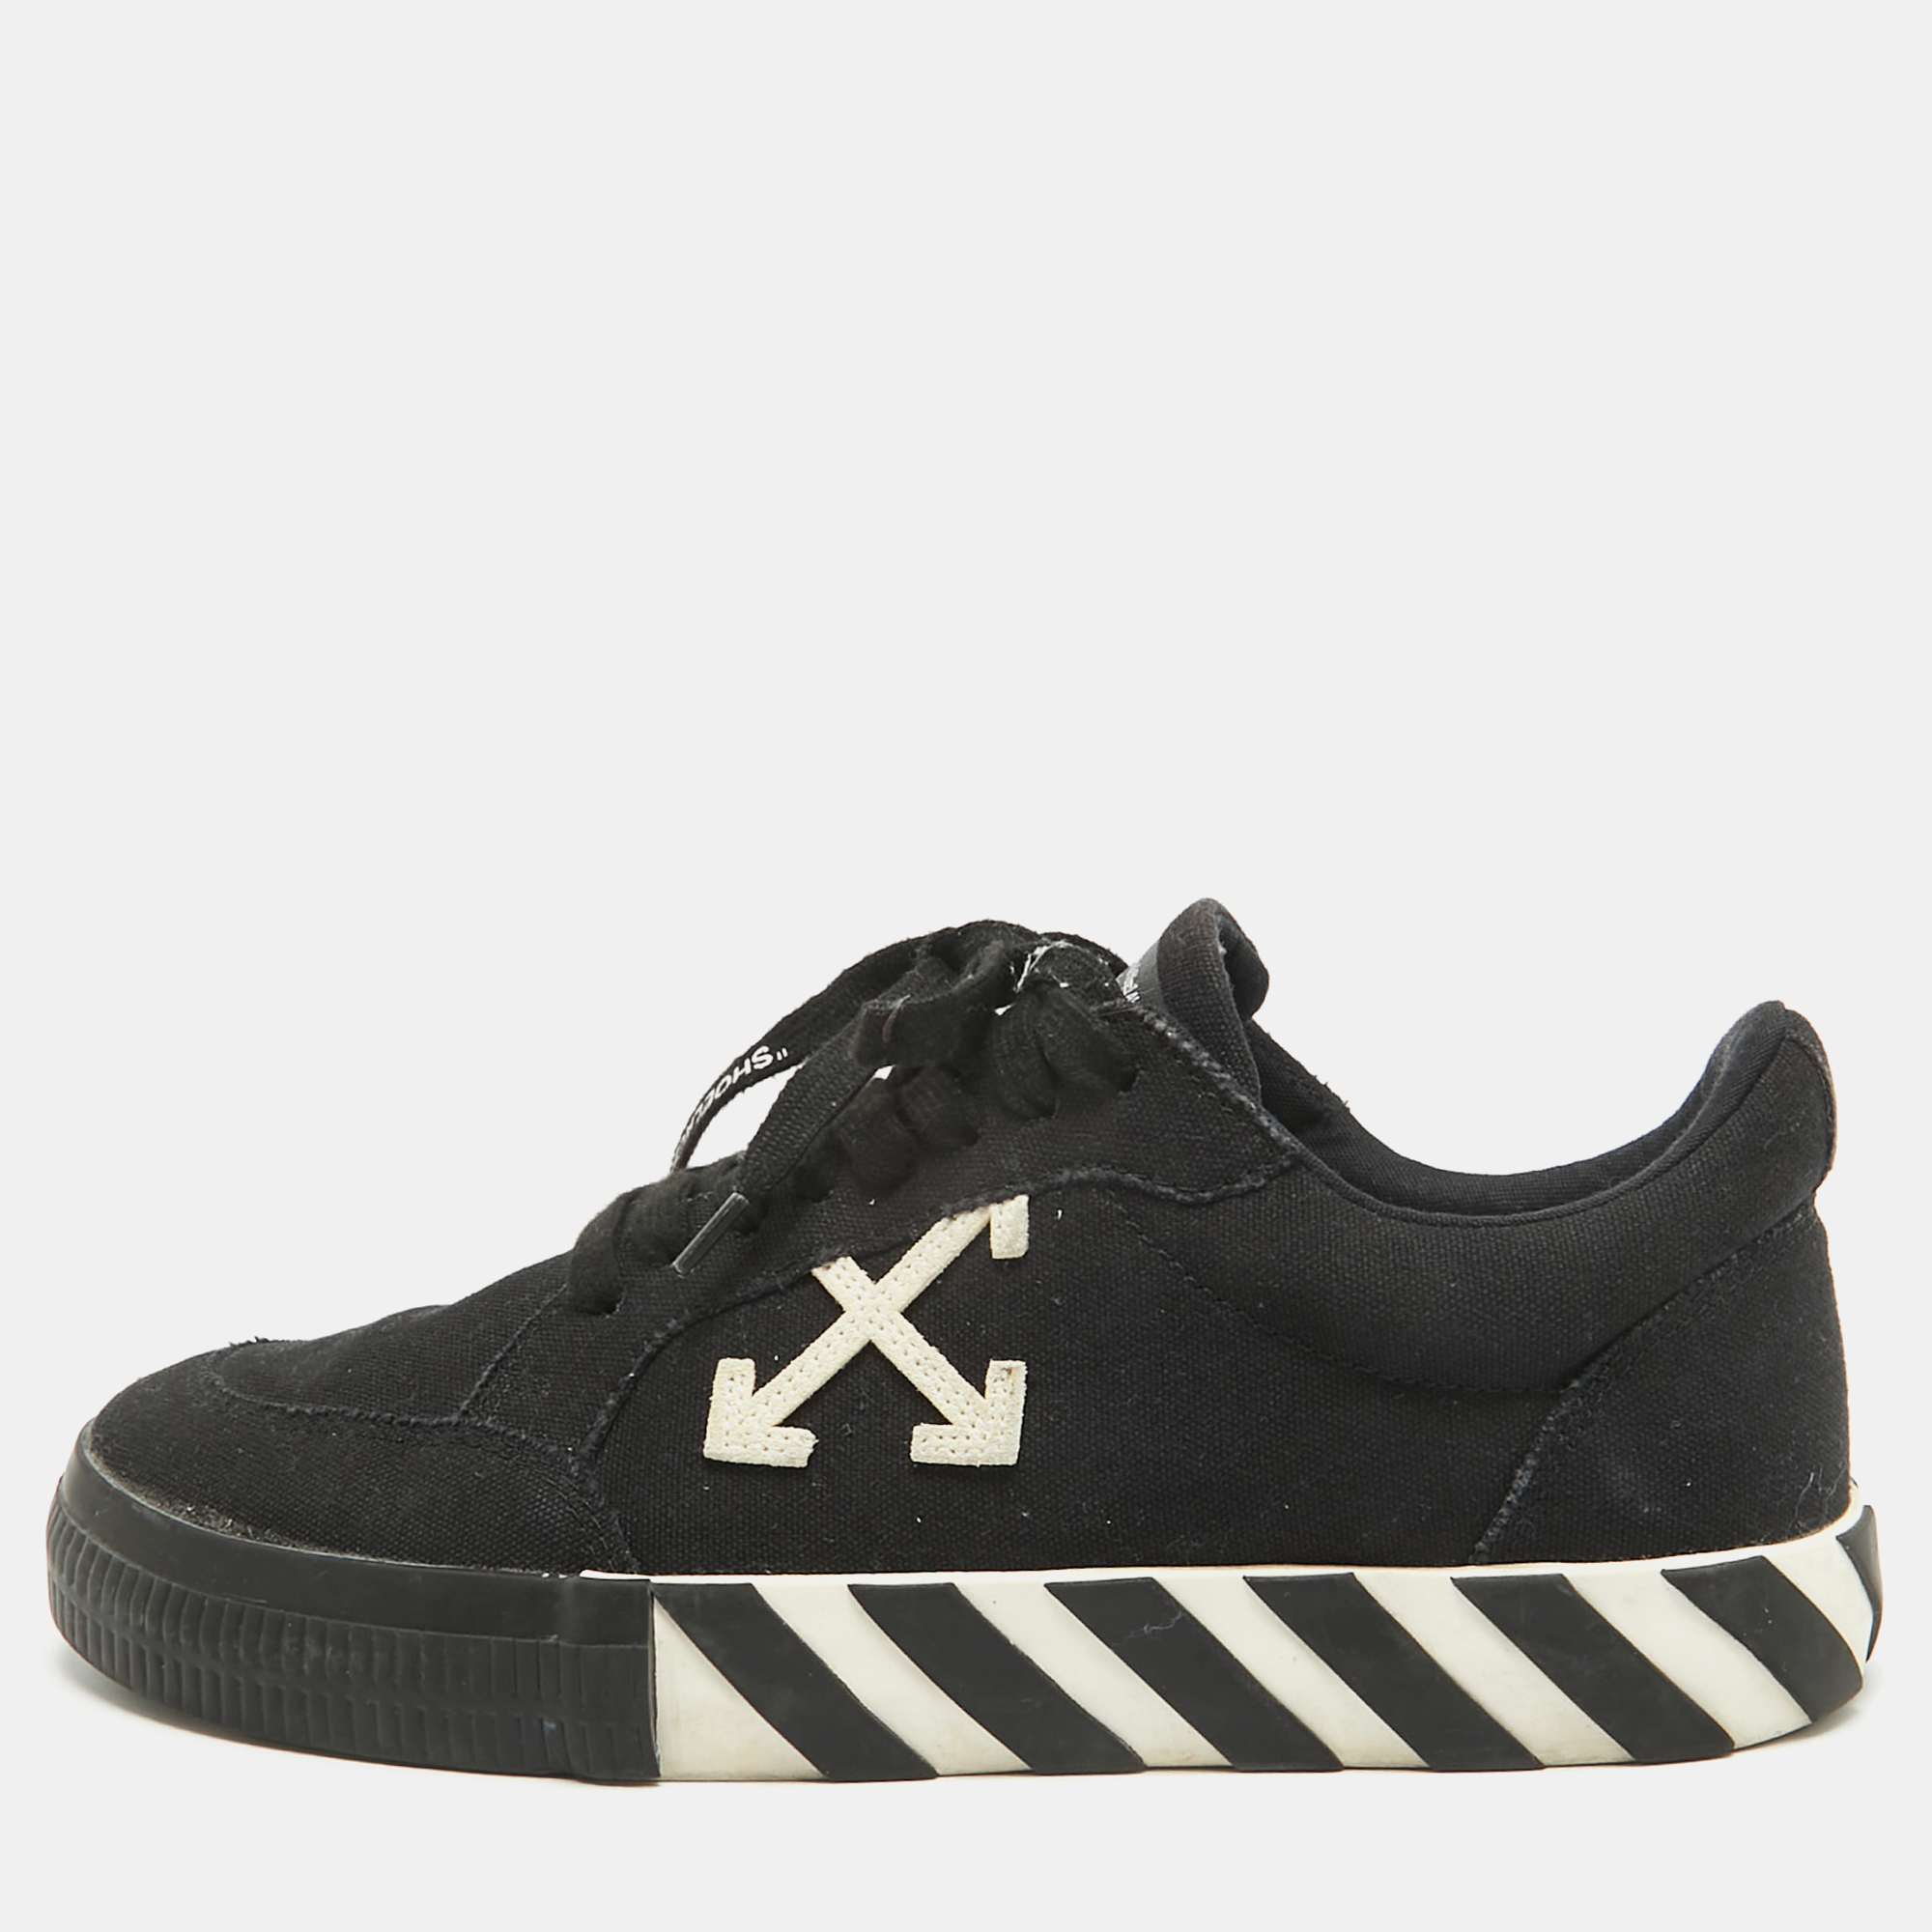 Off-white black canvas vulcanized low top sneakers size 42